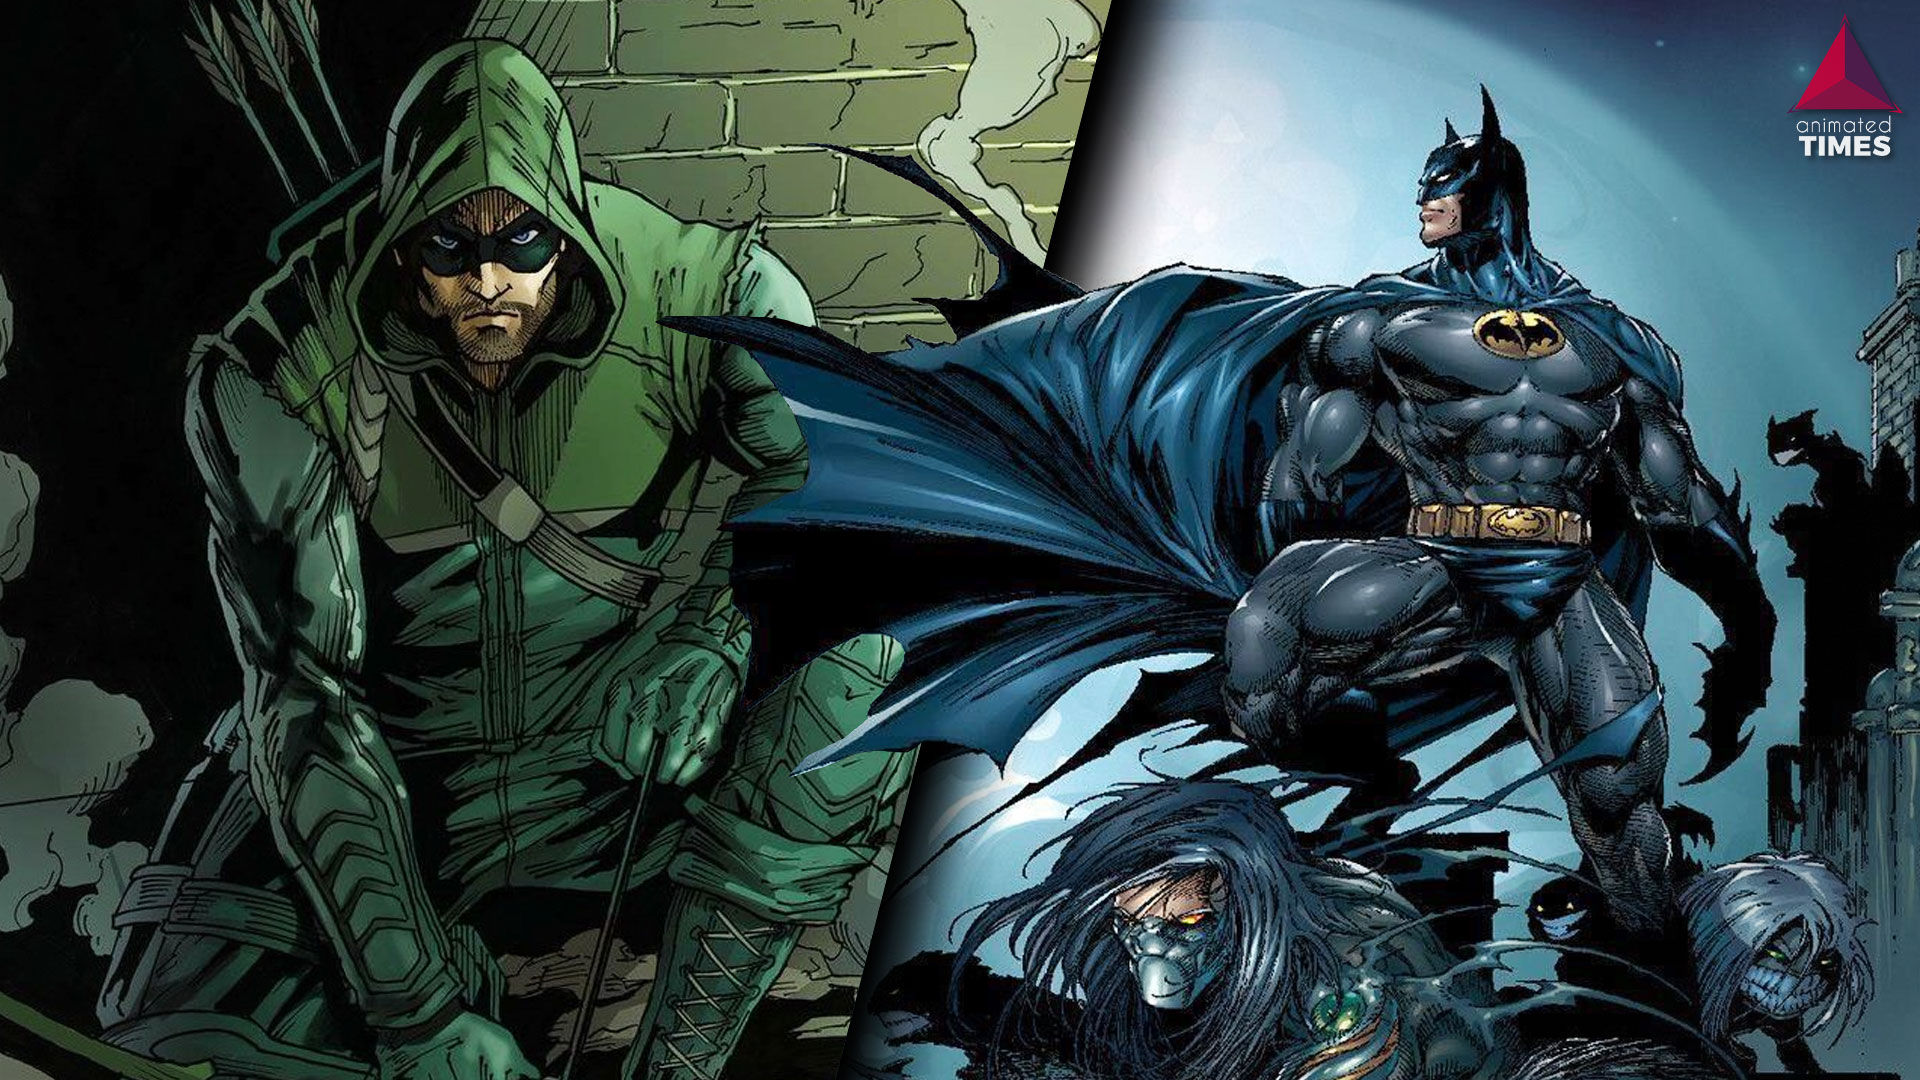 Who Wins The Streets – The Knight of Gotham or The Emerald Archer?